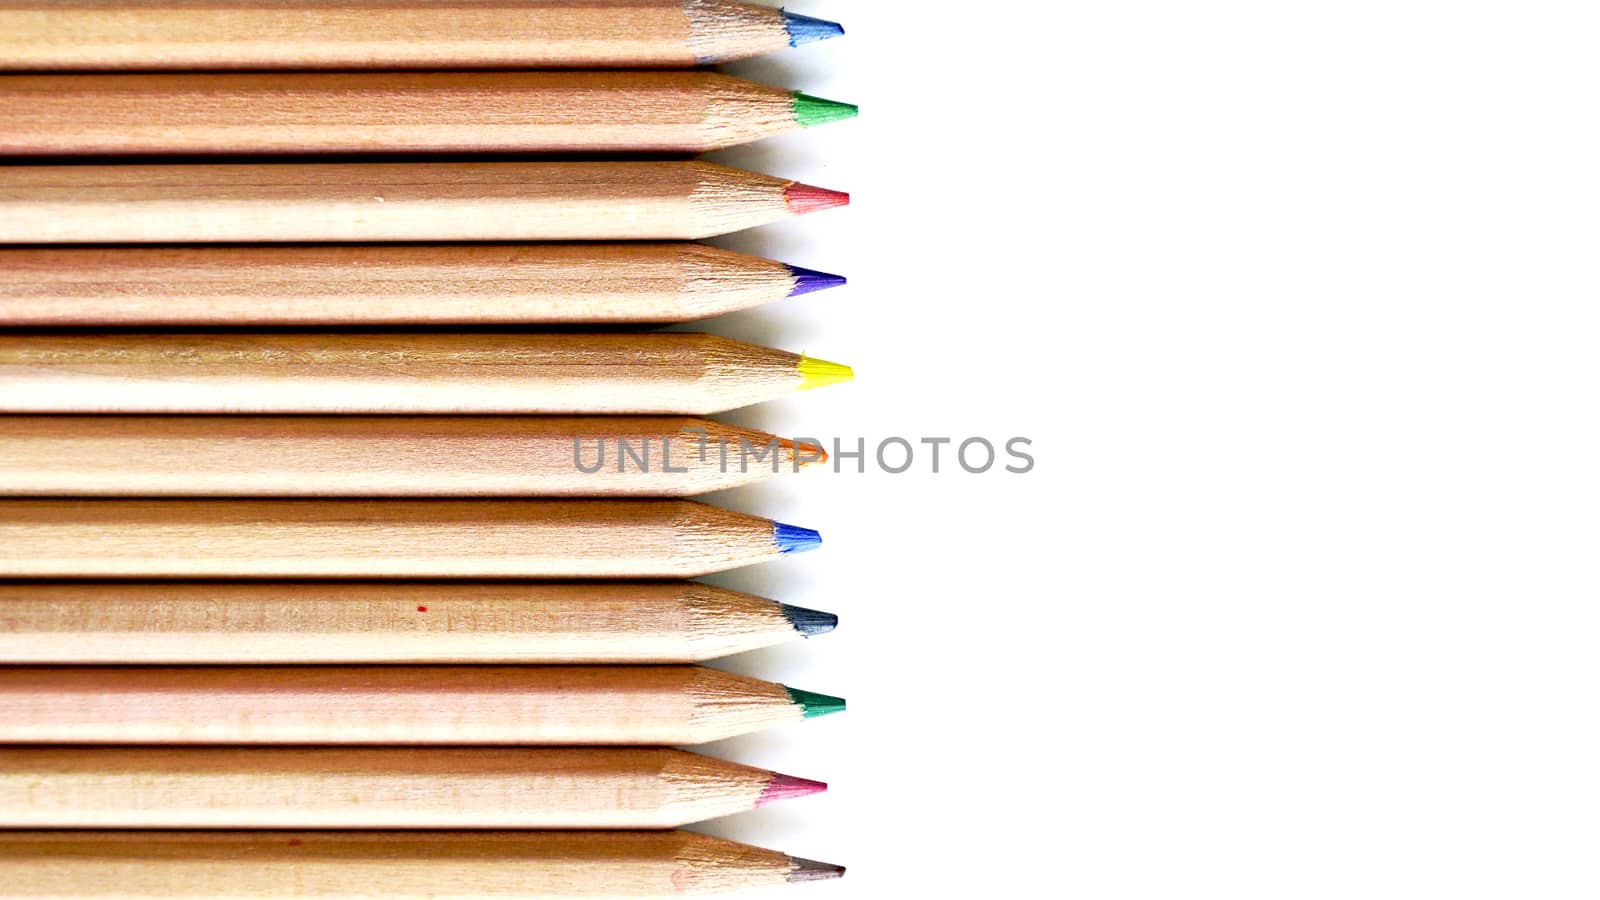 Wooden Color pencils arrangement top view stationery office supply business isolated